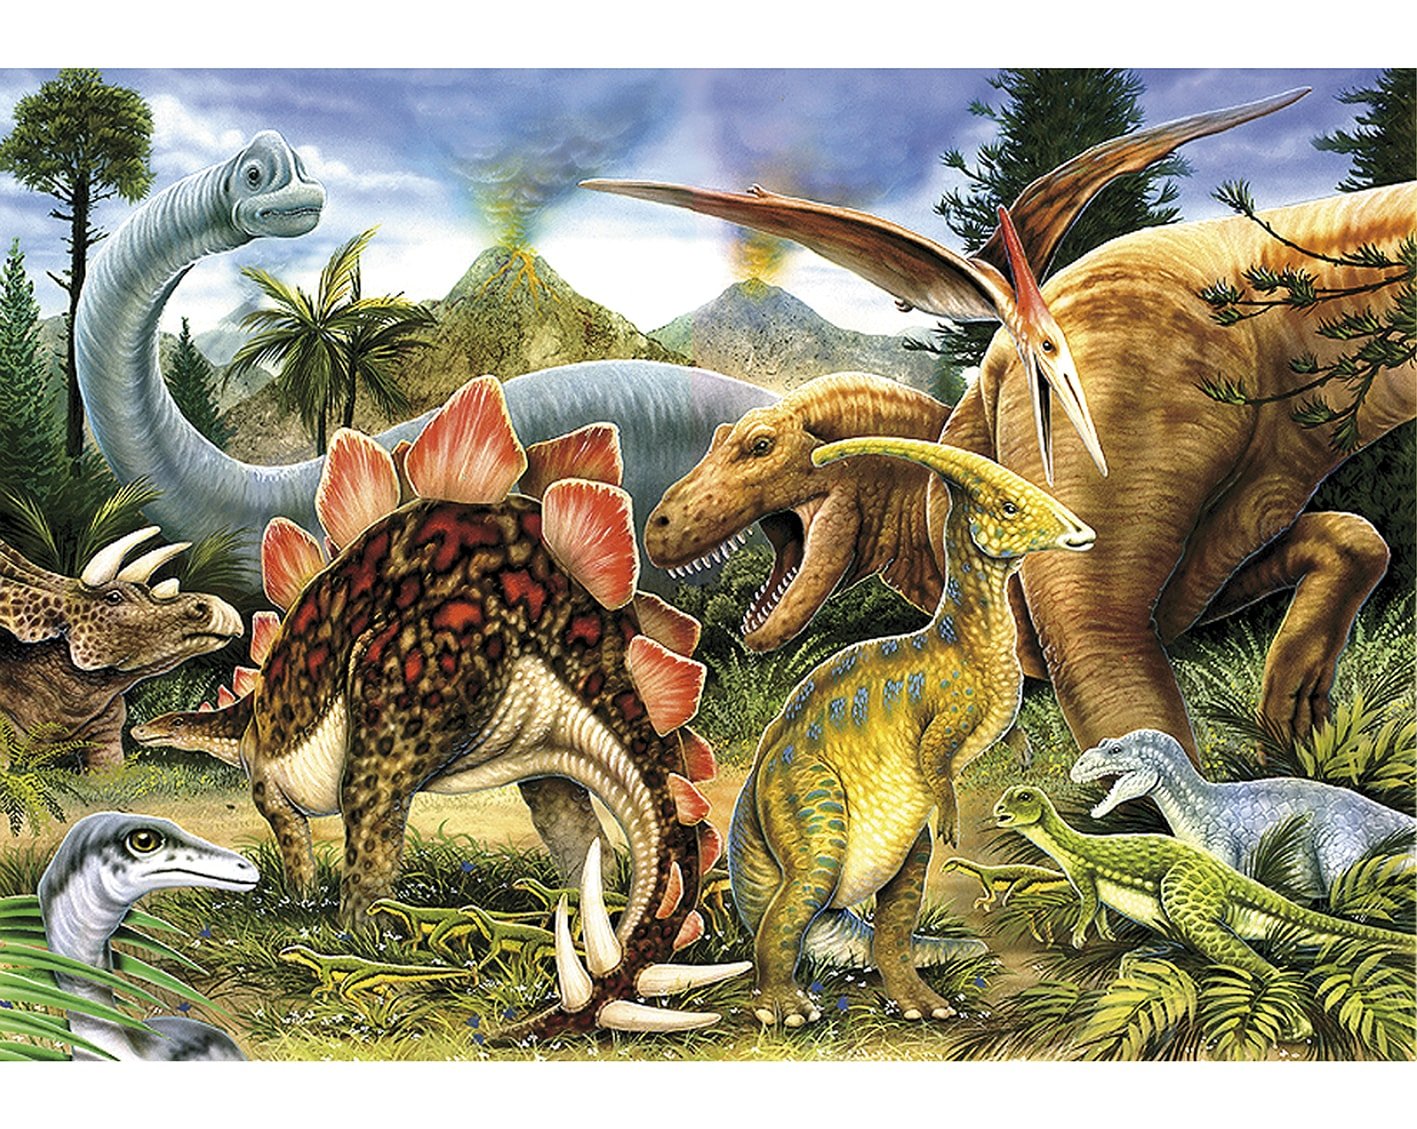 24 Piece Wooden Jigsaw Puzzle - Dinosaurs